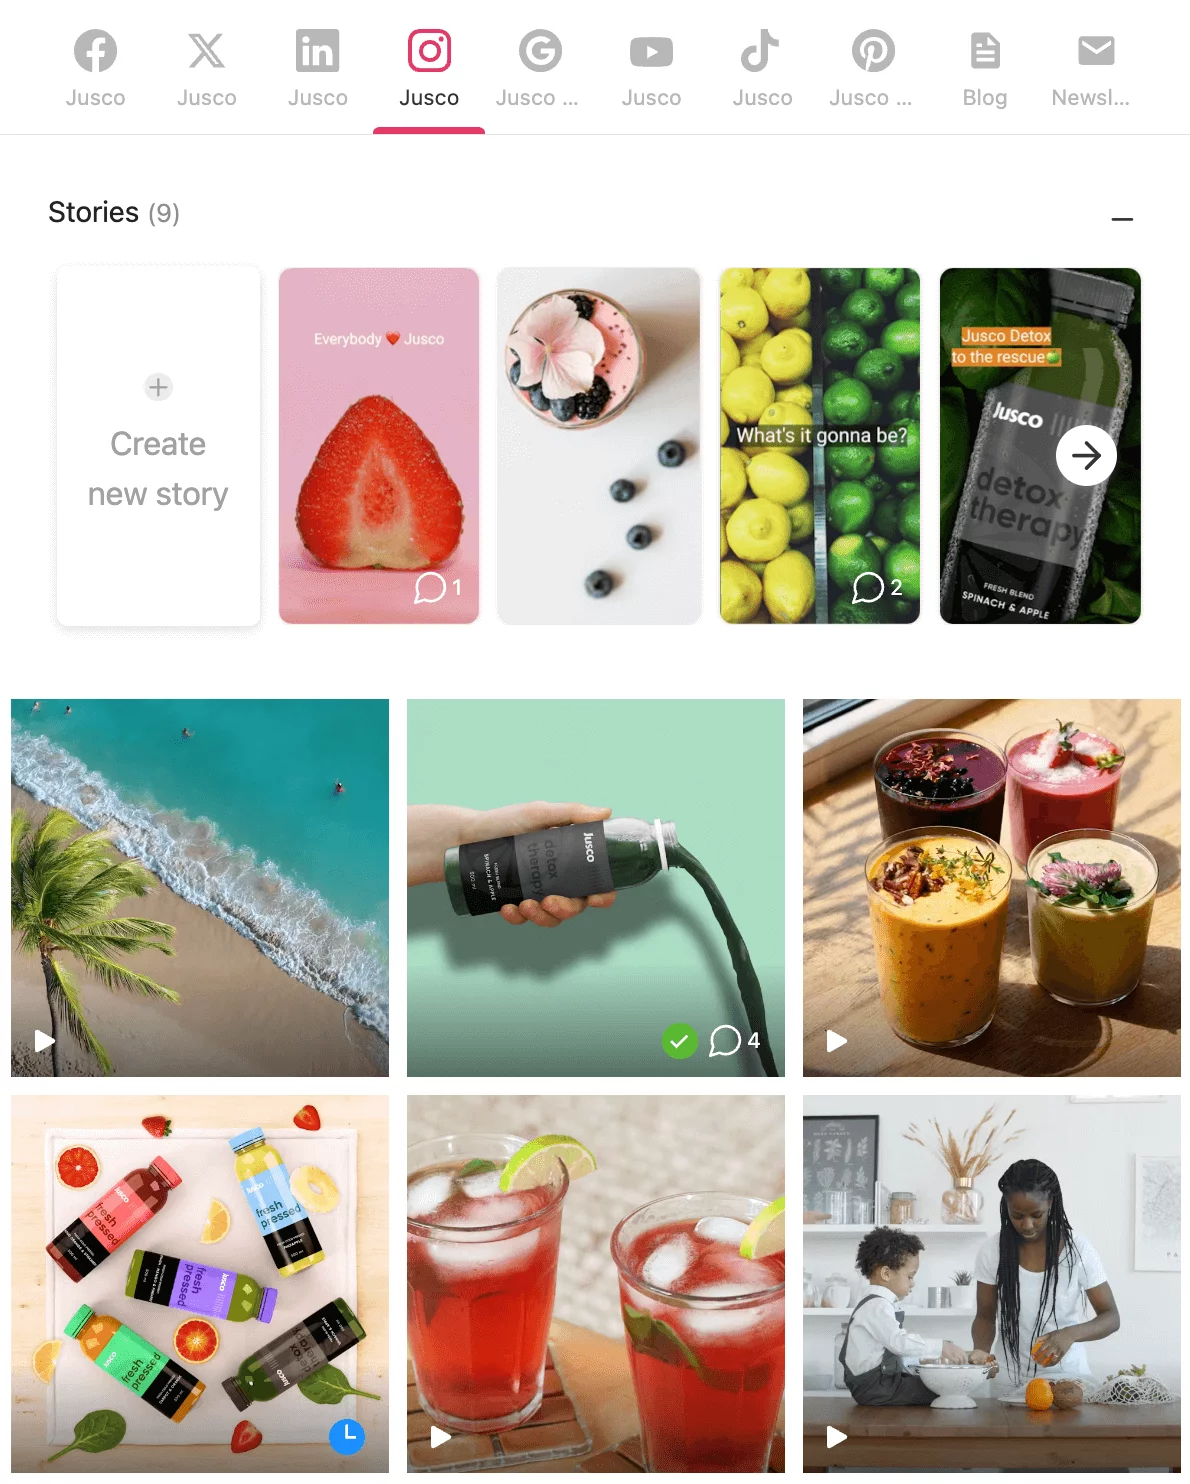 Planable's grid view showing Jusco stories with images of various drinks, fruits, a beach scene, and a mother with child preparing food.